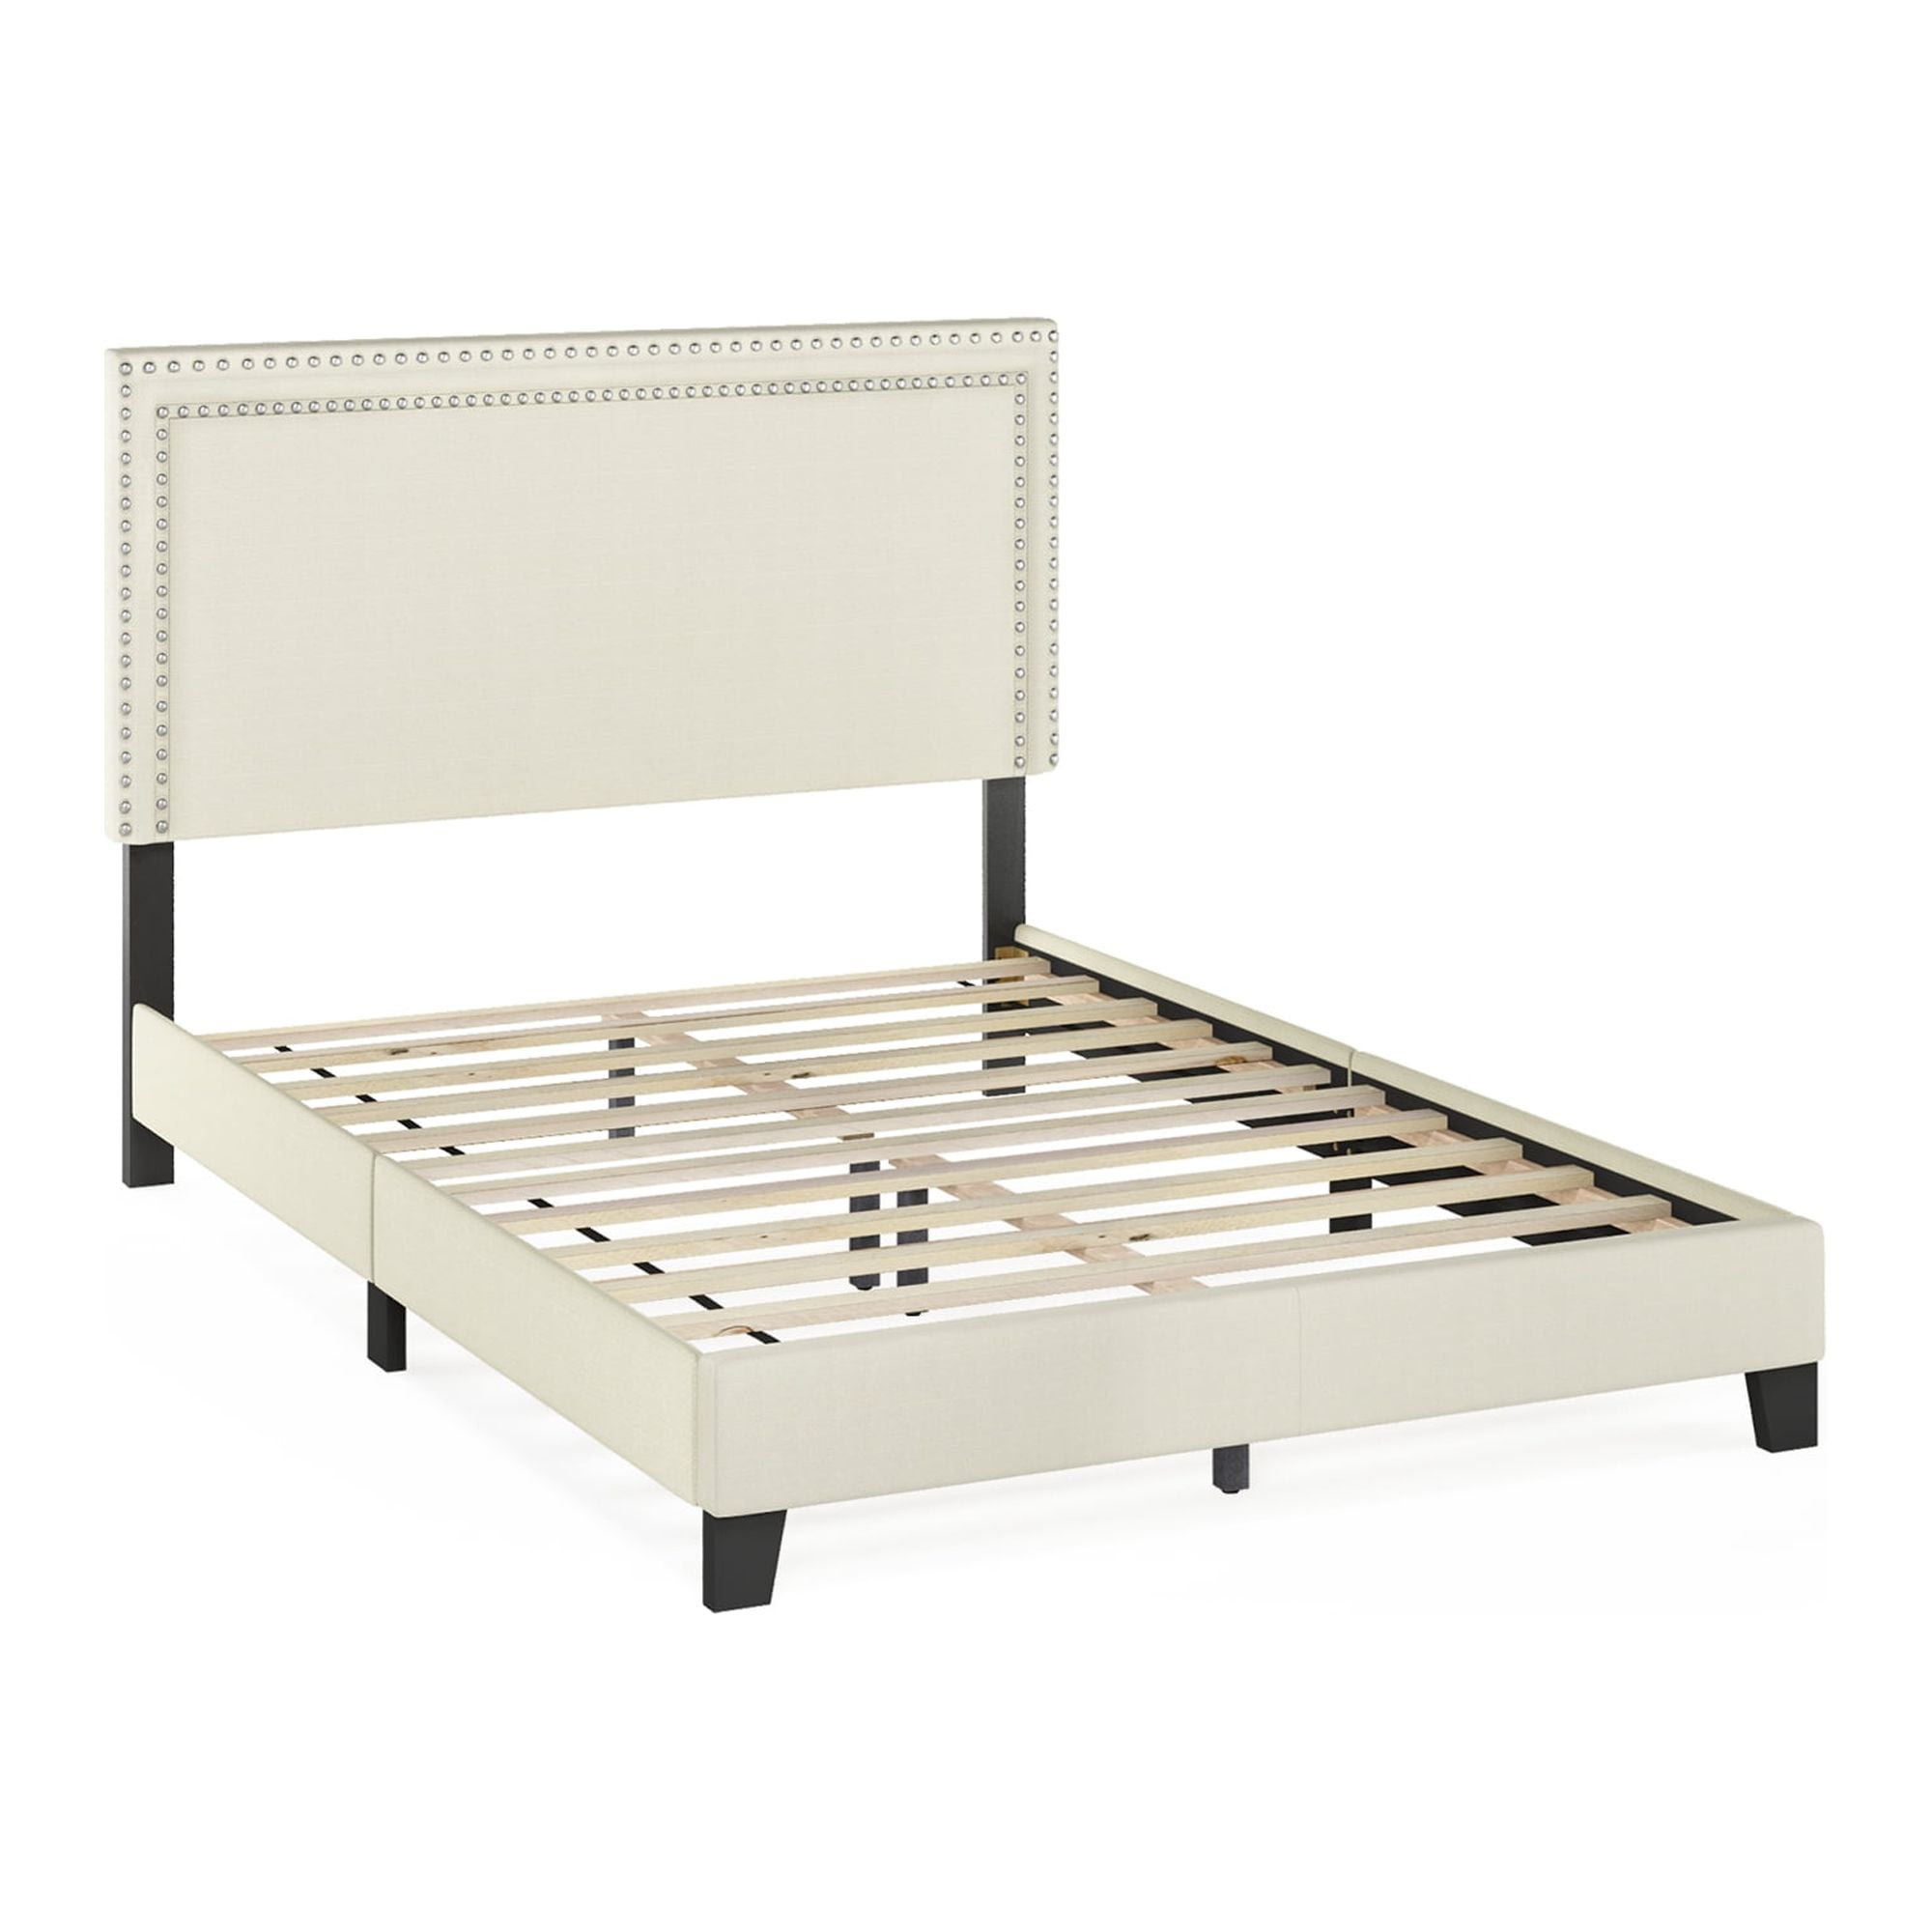 Furinno Laval Double Row Nail Head Bed Frame, 12PC Slat Style, Linen ...